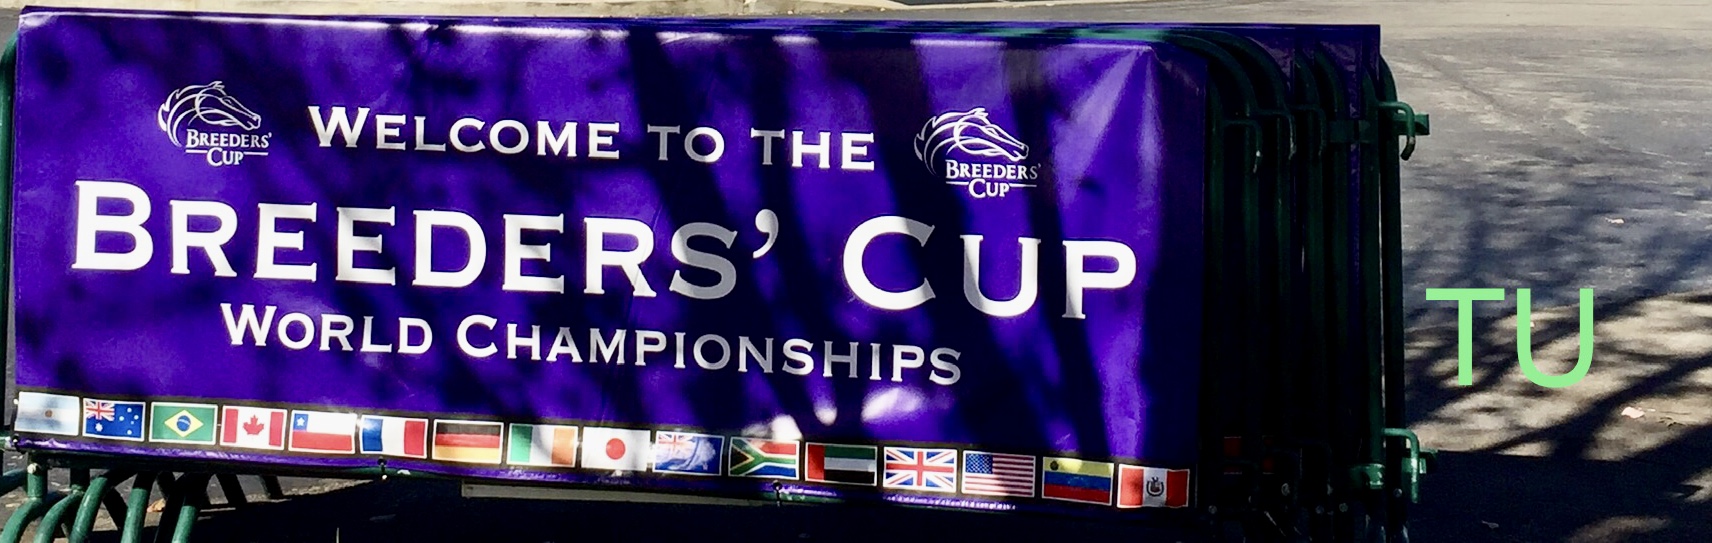 Breeders' Cup 2021 will be hosted by Del Mar Racetrack.